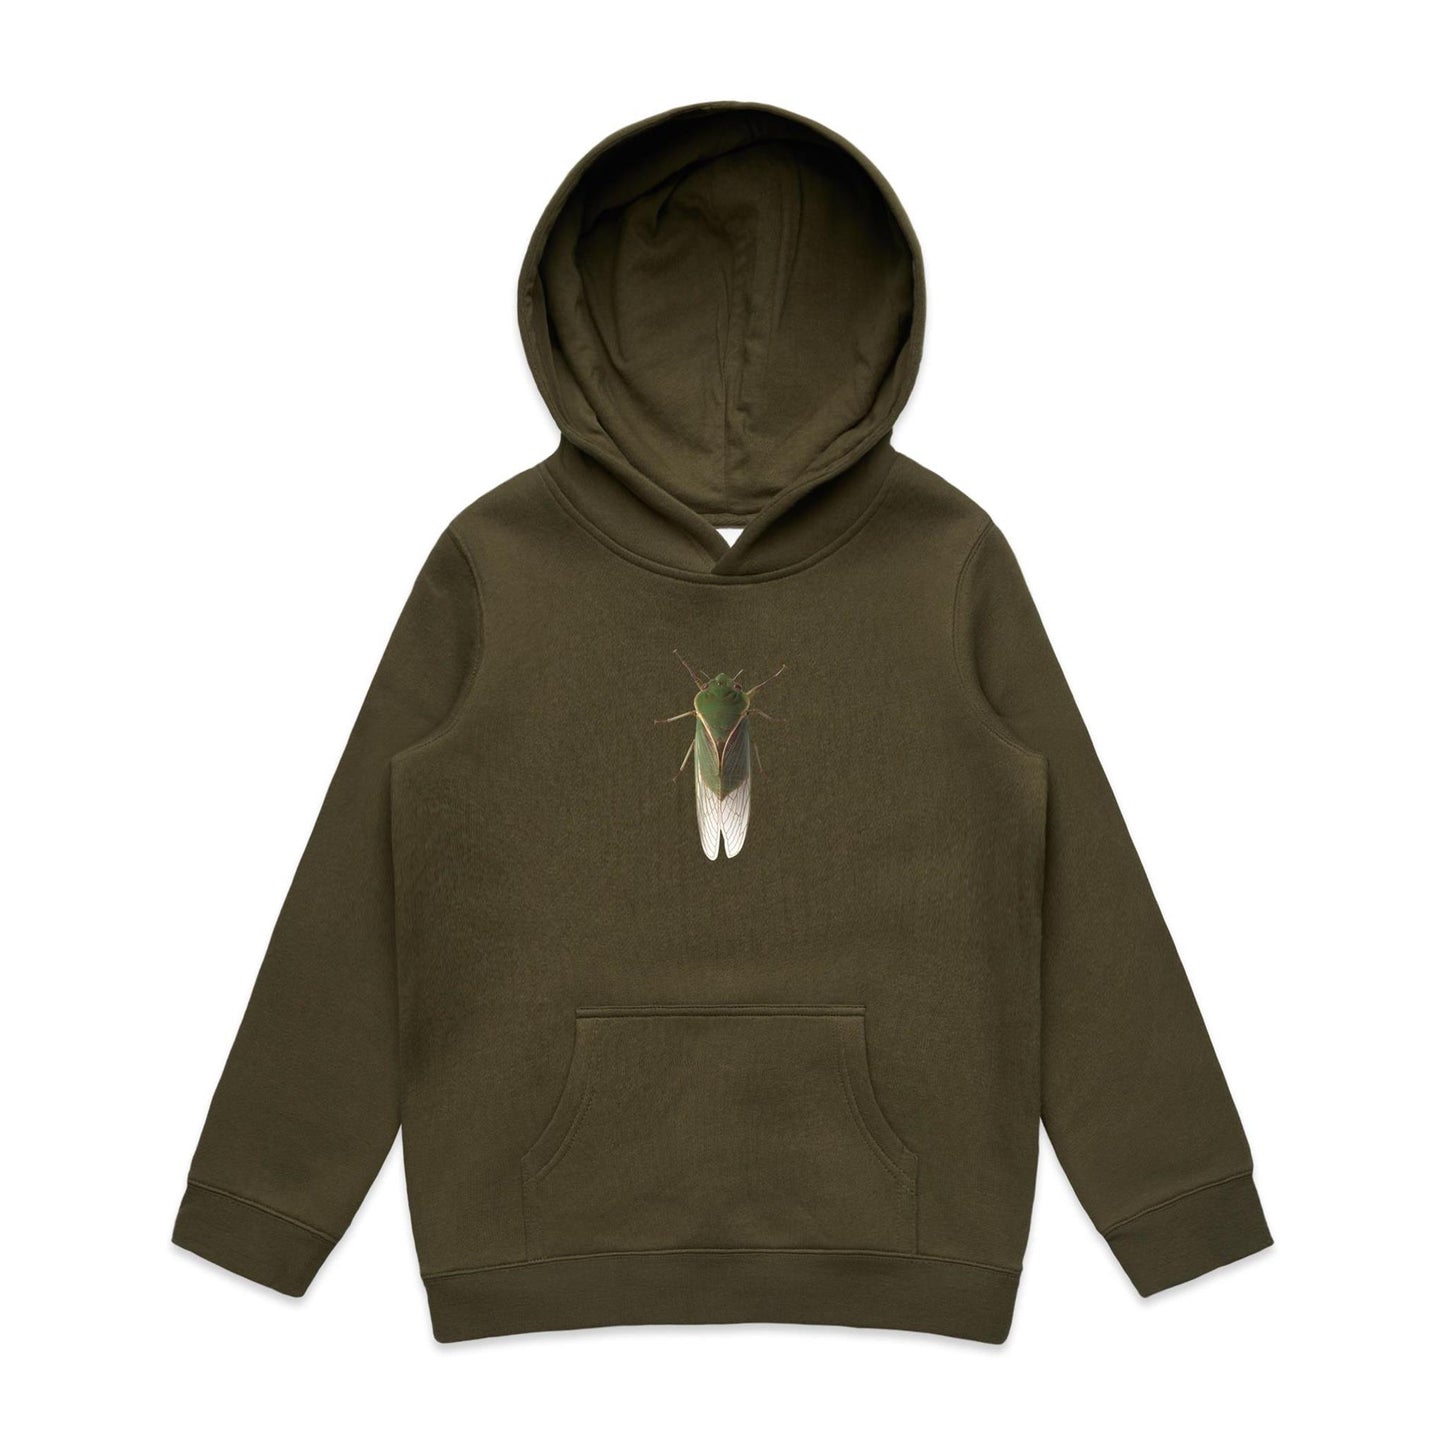 The Little Guy Hoodies for Kids